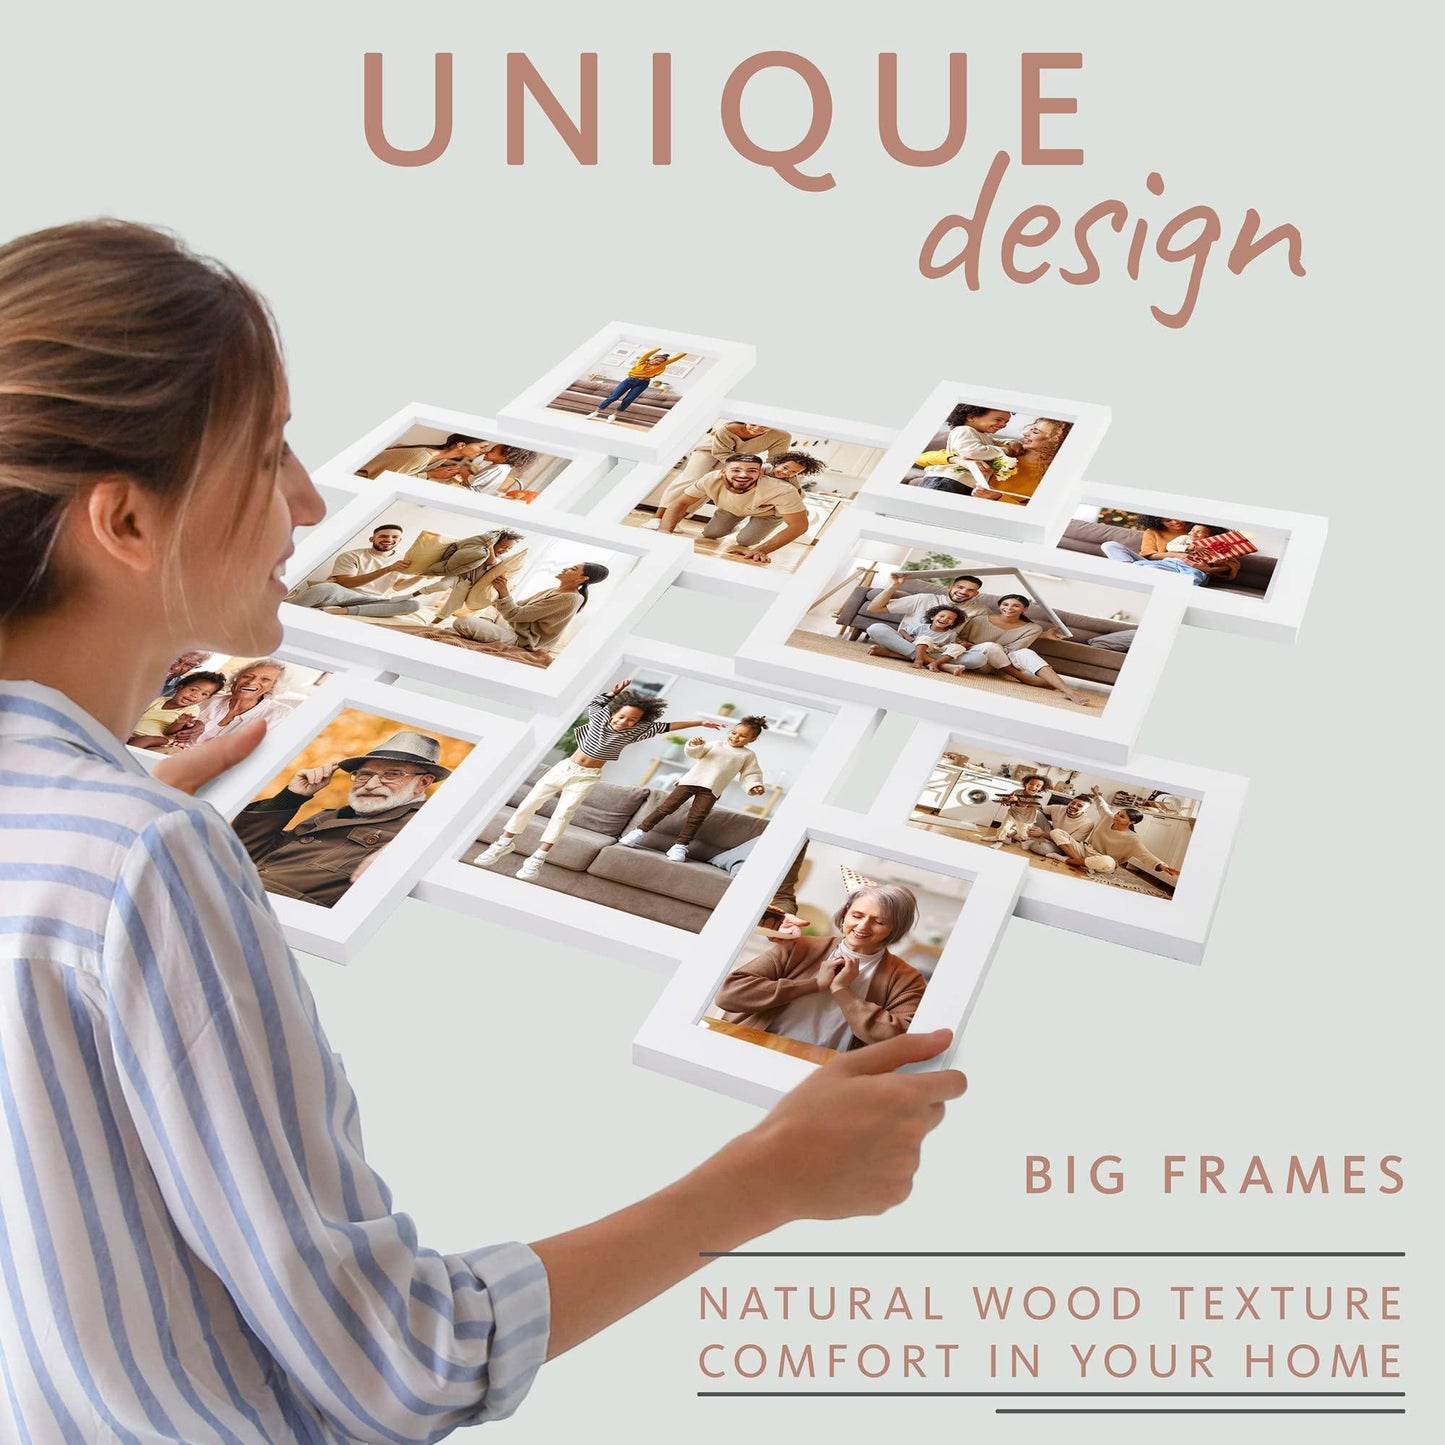 Picture Frames Collage Wall Decor – Picture Frame Collage 4 x 6 and 6x8 inch